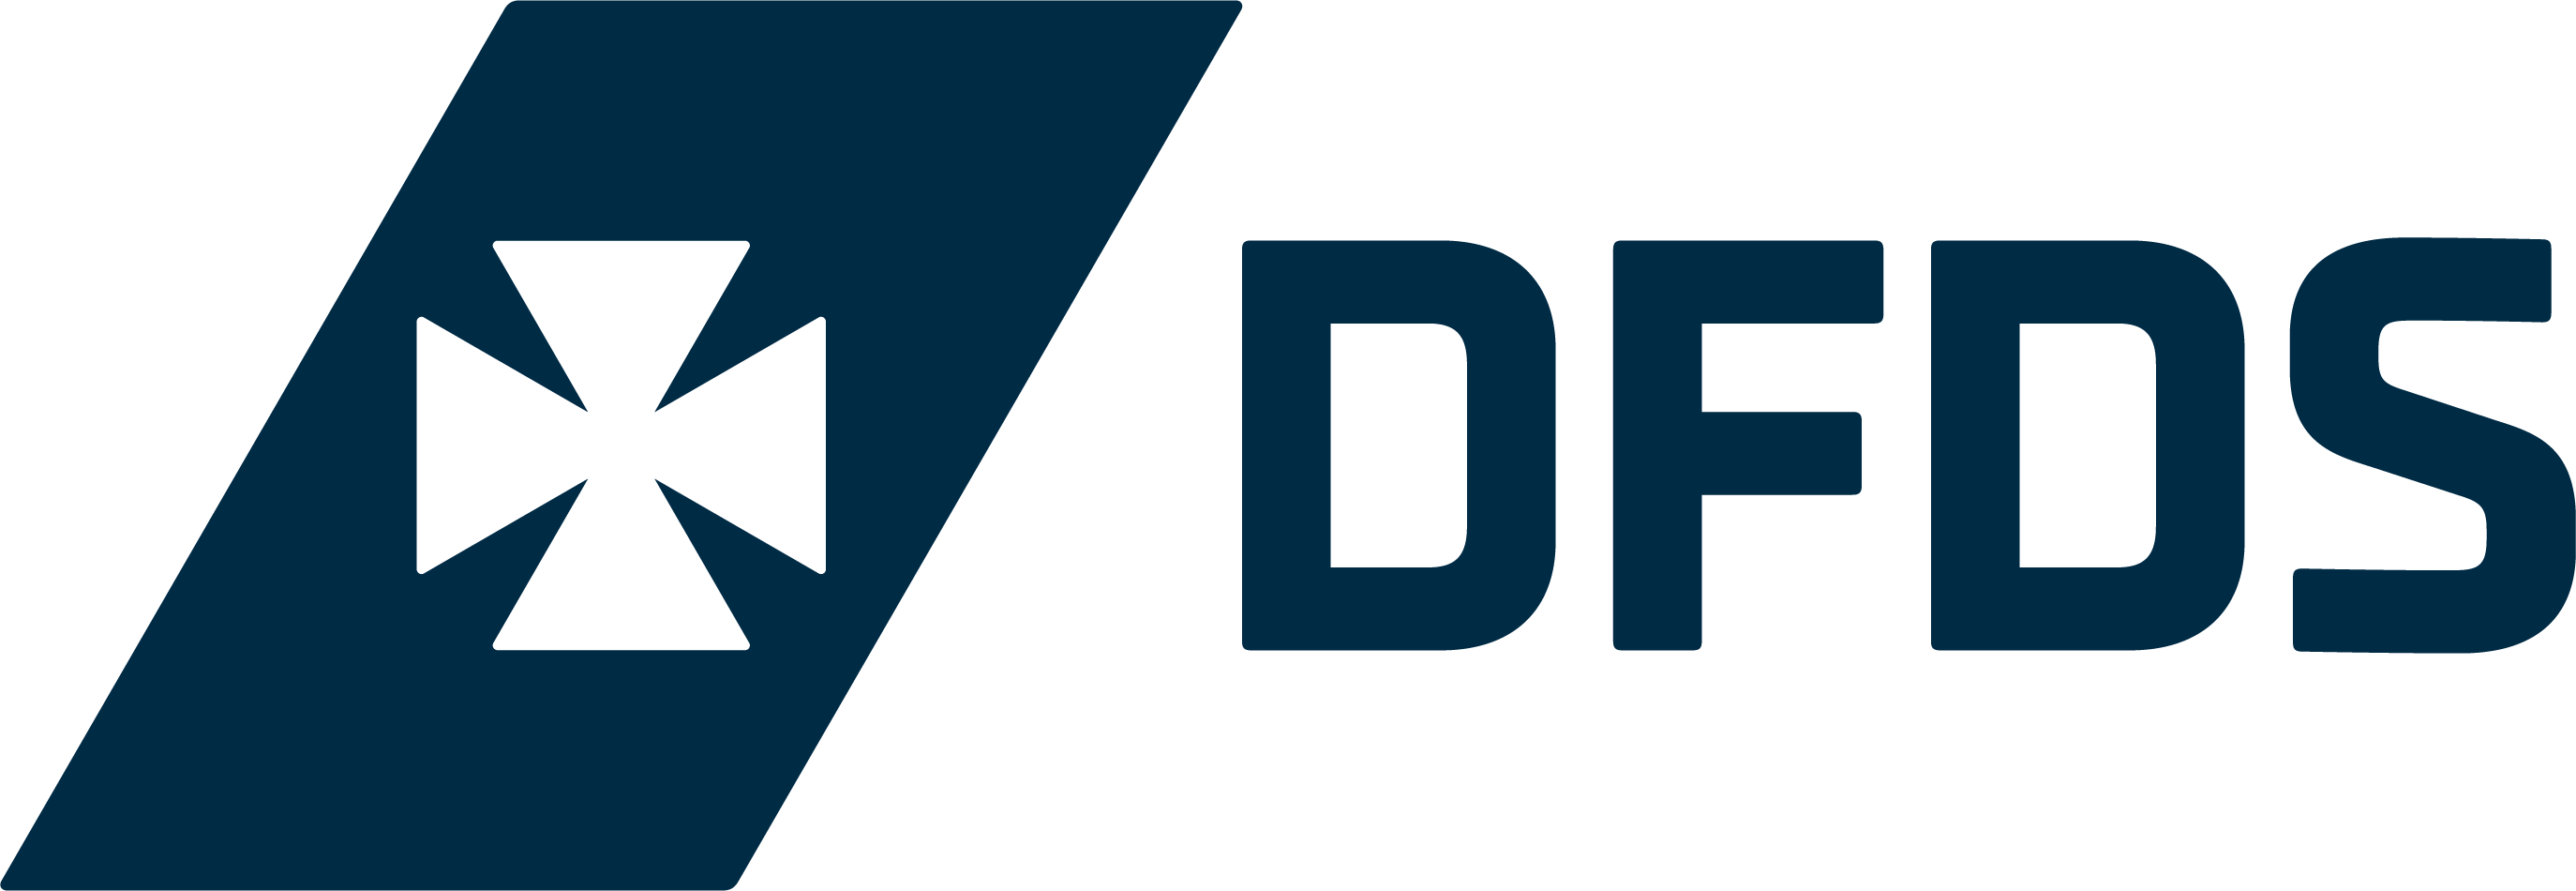 dfds-logo-2021-group-blue-rgb.png